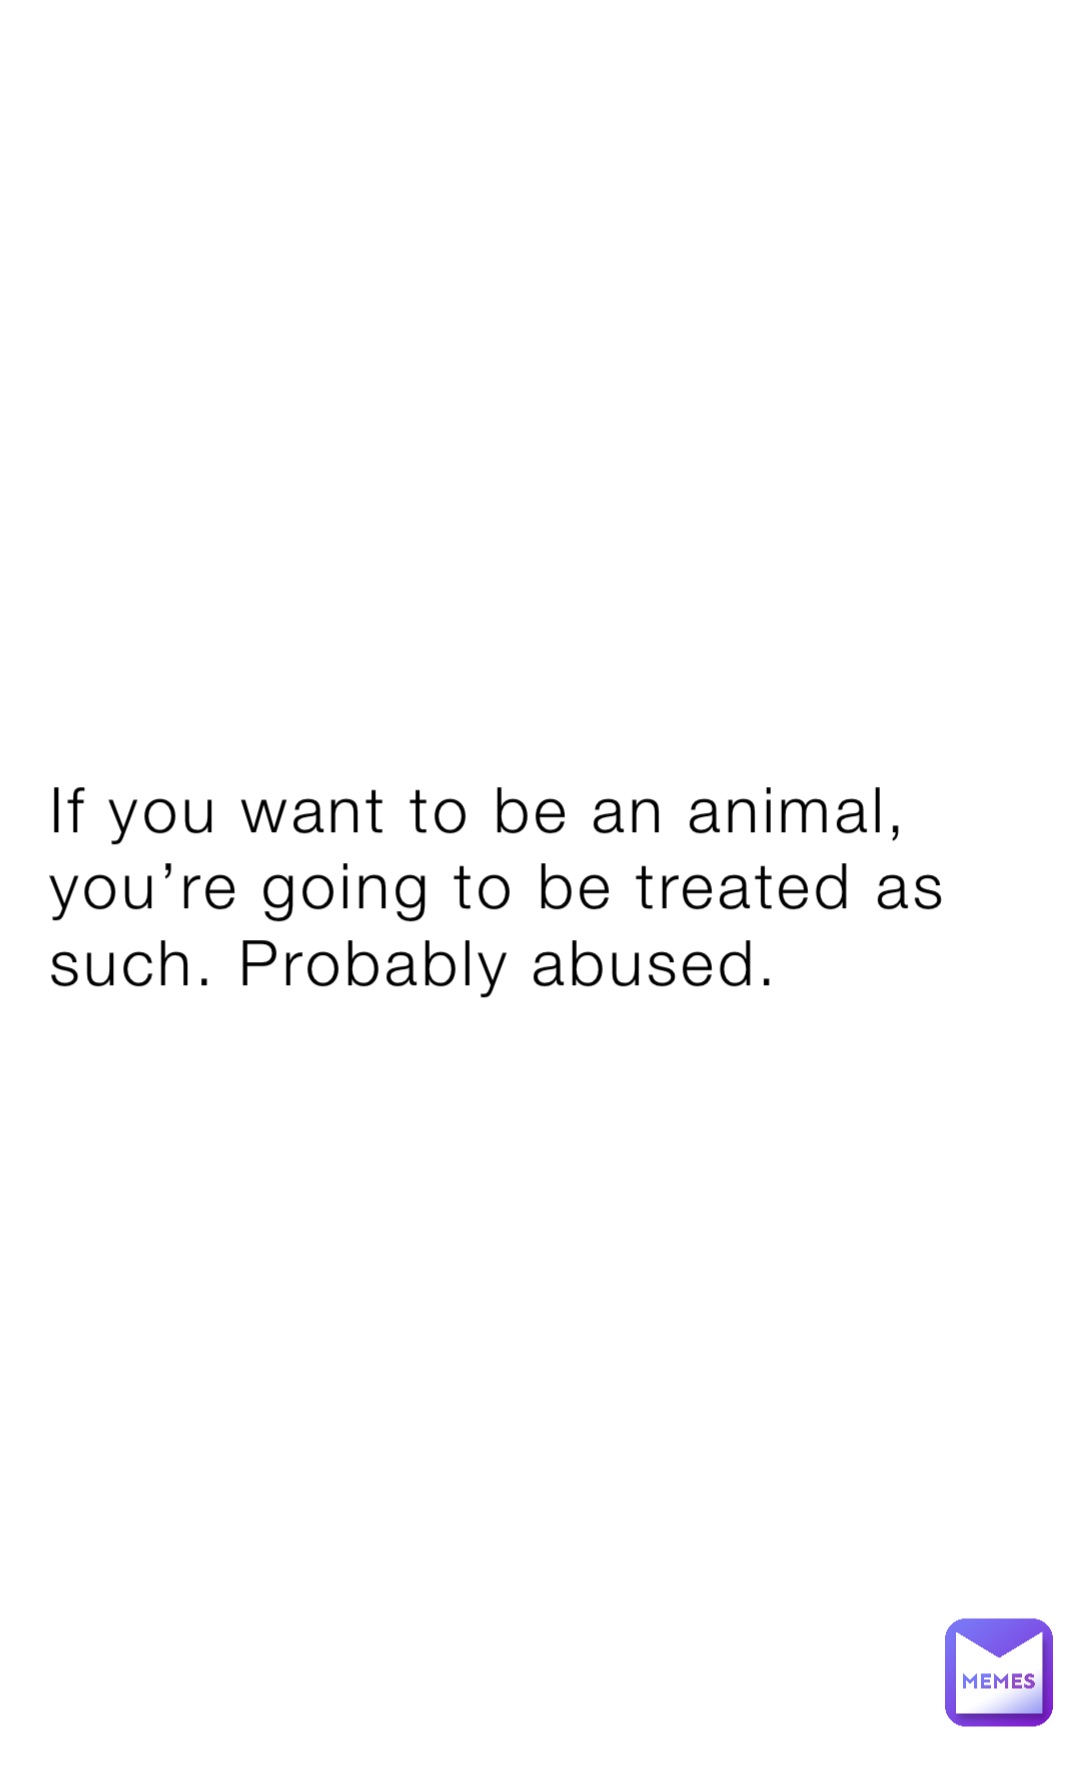 If you want to be an animal, you’re going to be treated as such. Probably abused.